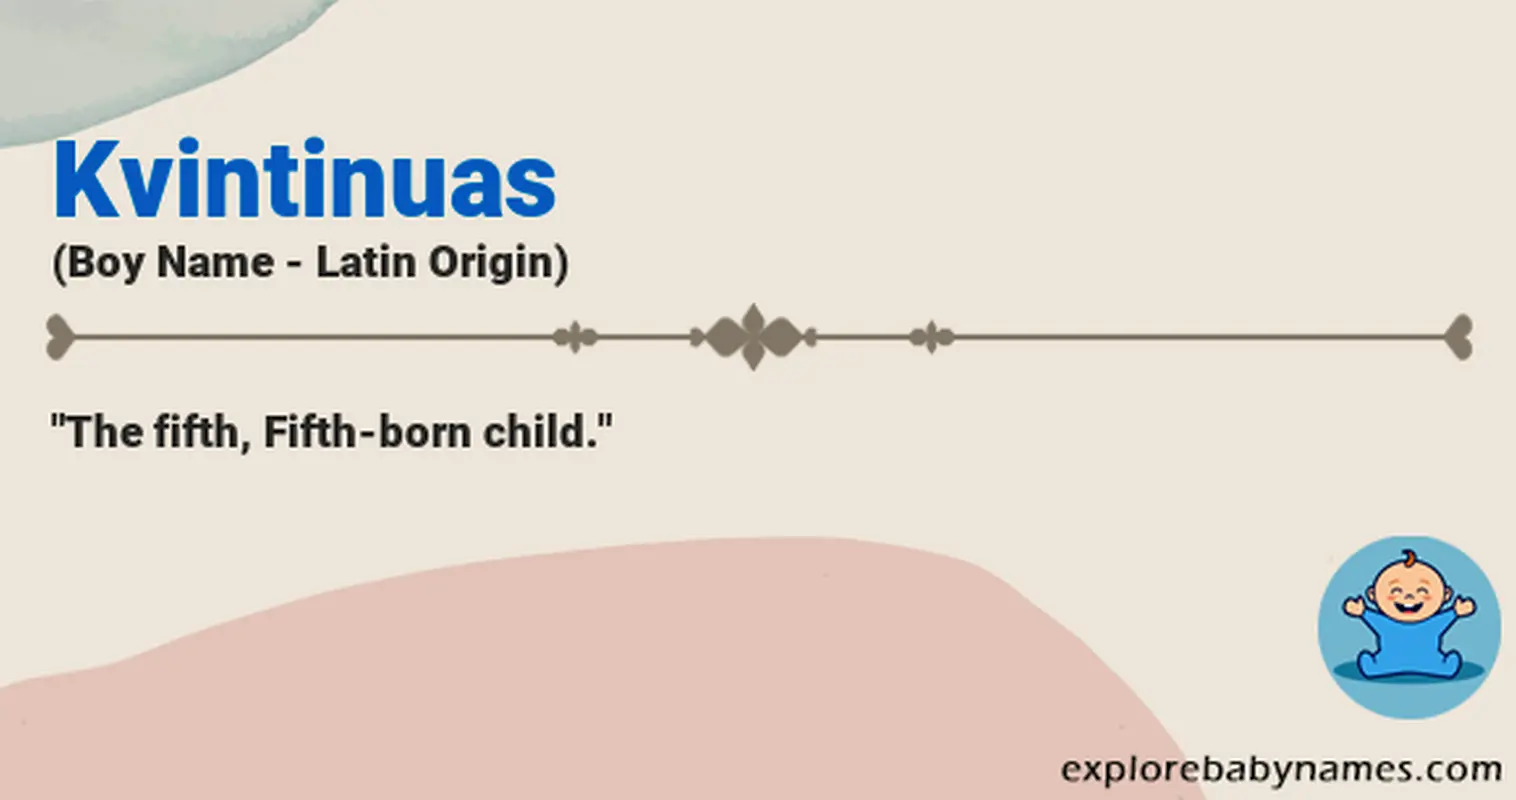 Meaning of Kvintinuas